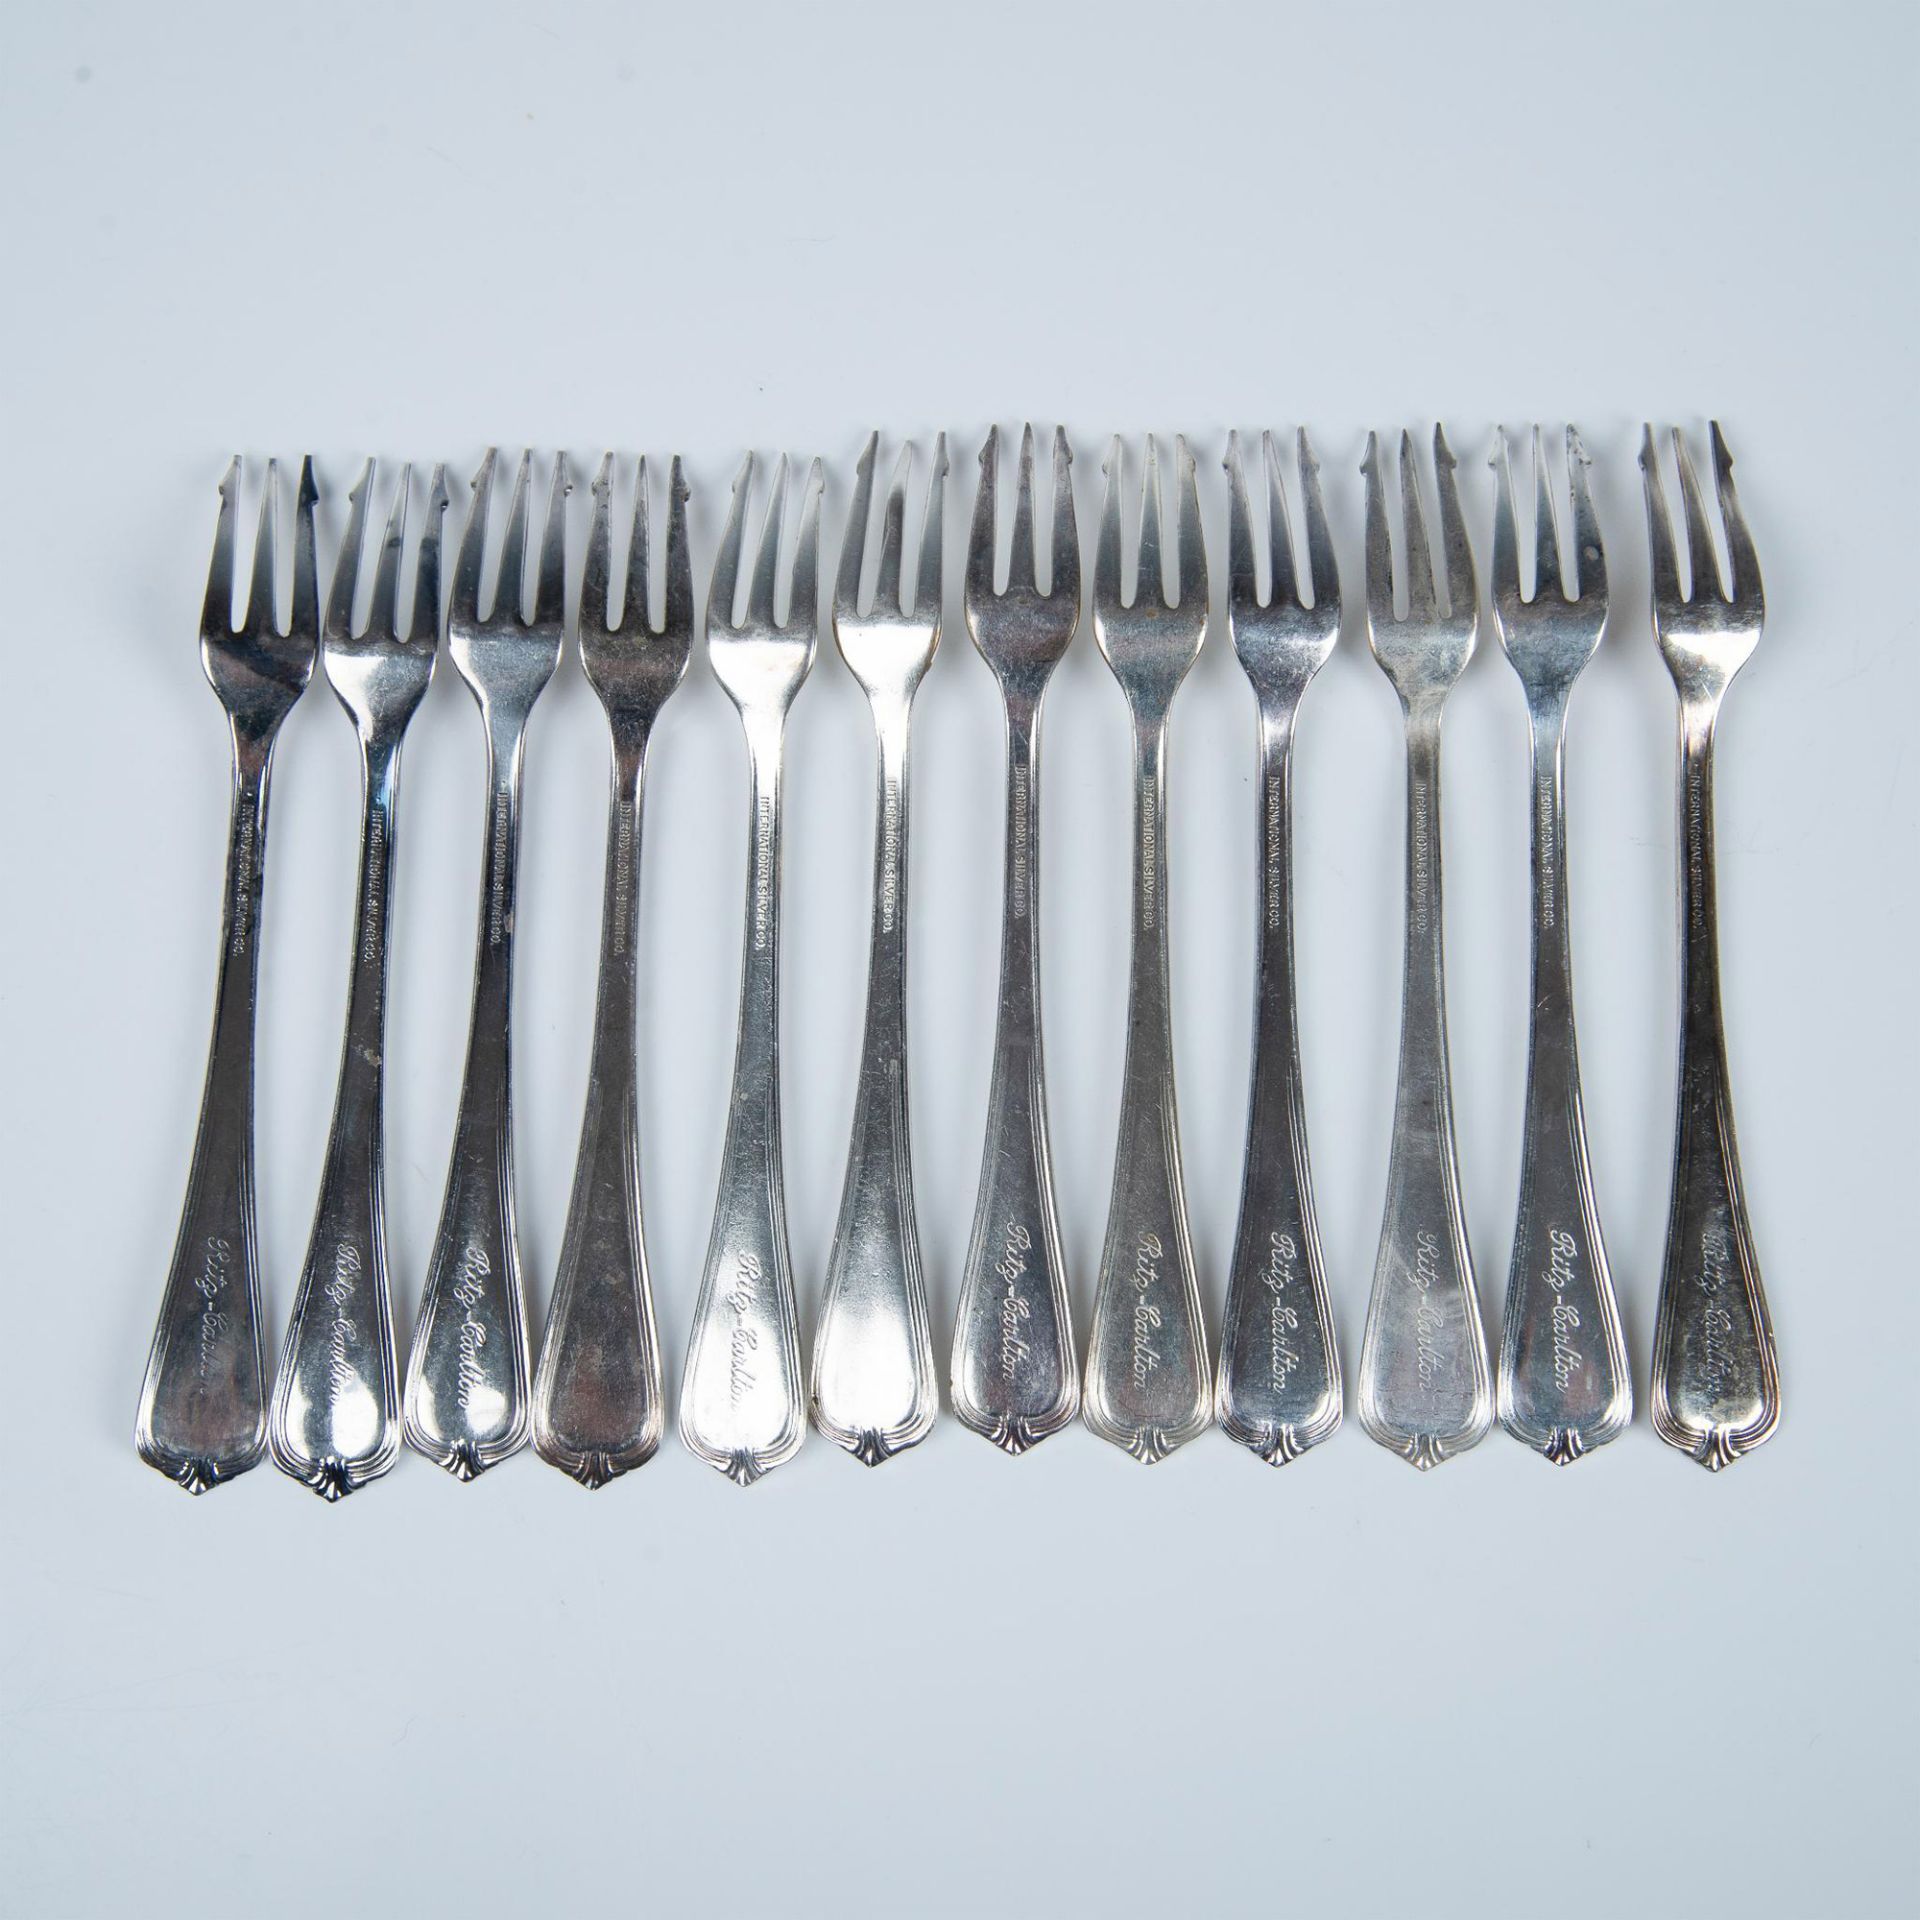 12pc Ritz-Carlton Cocktail Forks, International Silver Co. - Image 2 of 5